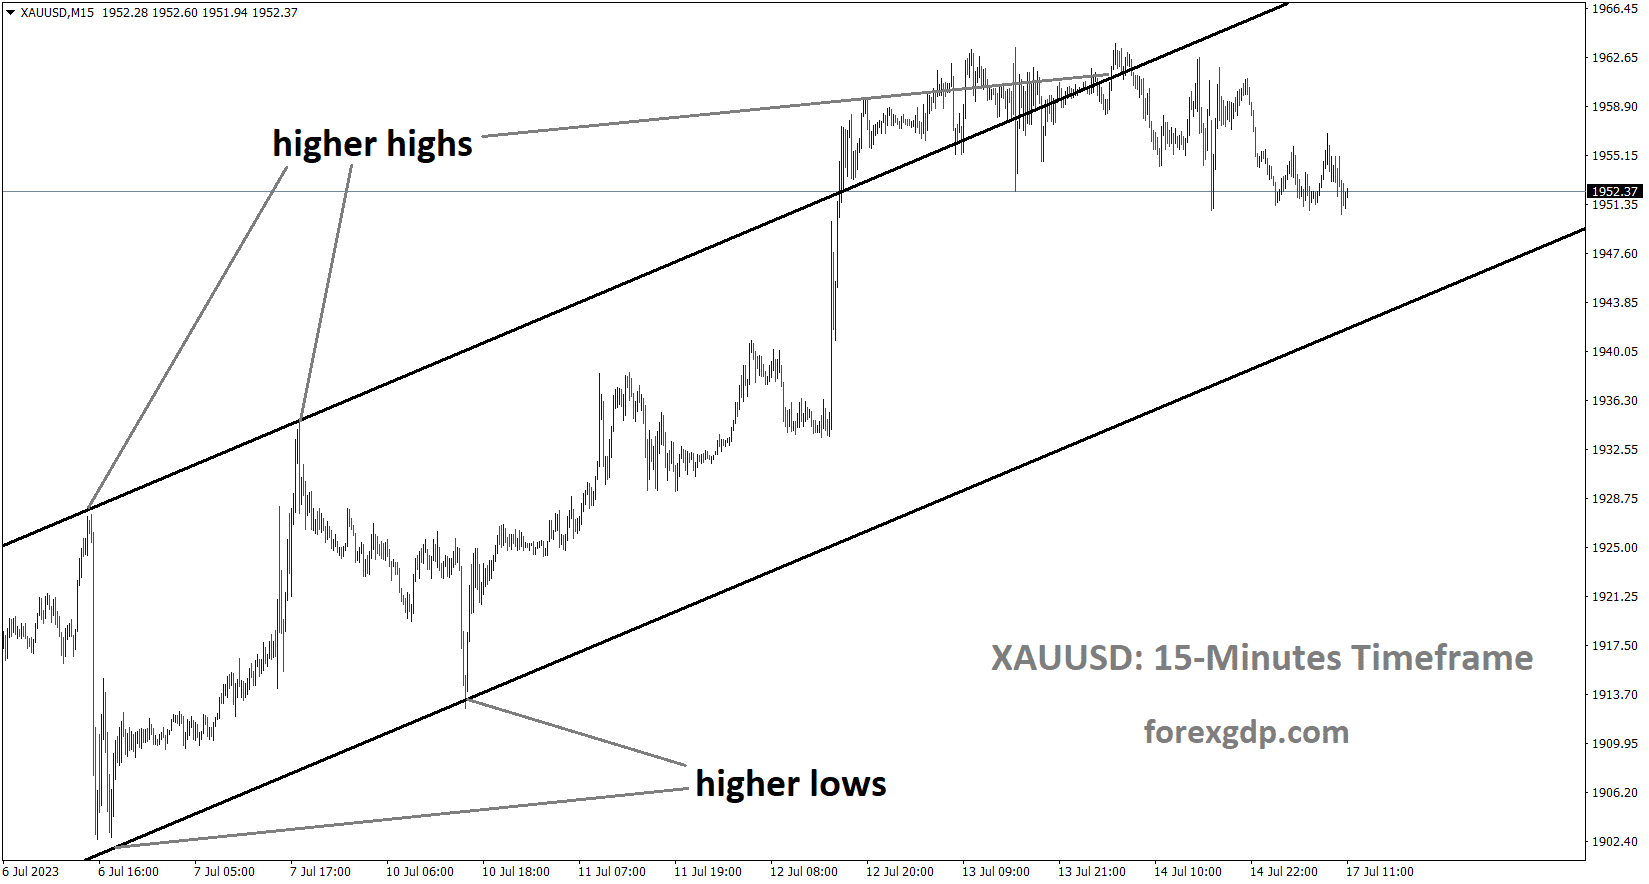 XAUUSD Gold Price is moving in an Ascending channel and the market has fallen from the higher high area of the channel